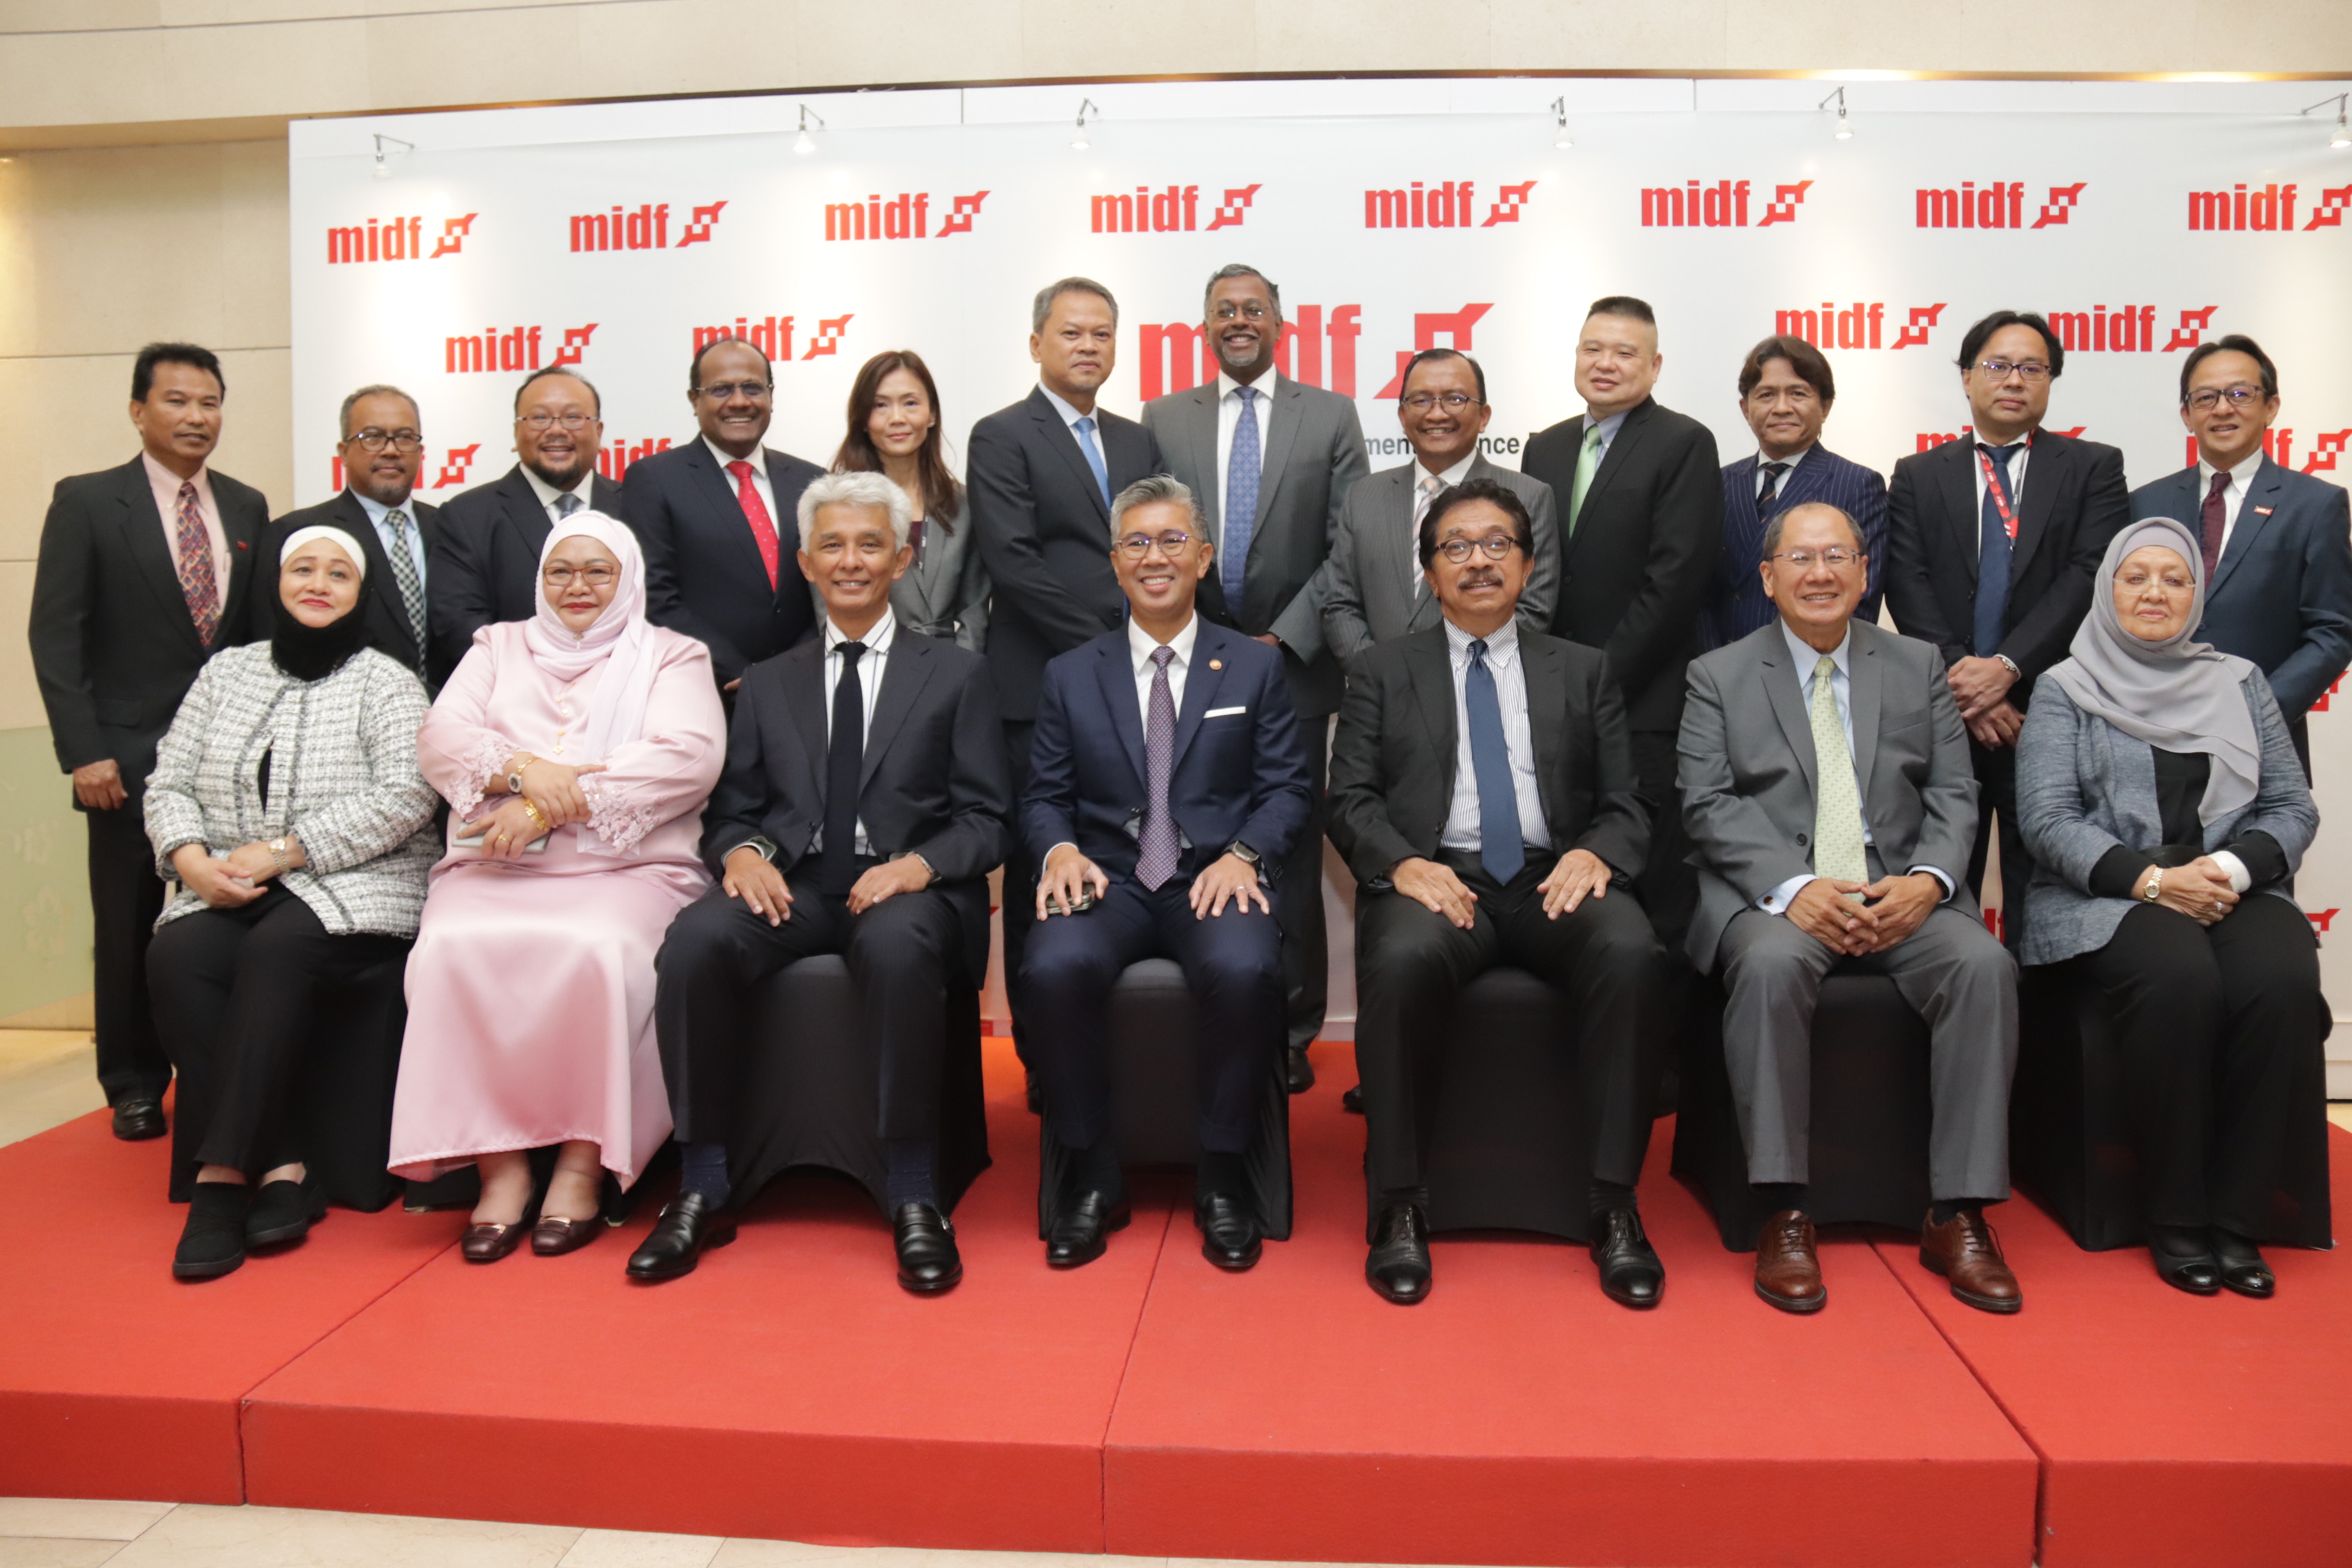 MITI Minister YB Tengku Zafrul with MIDF Board of Directors and Key Management